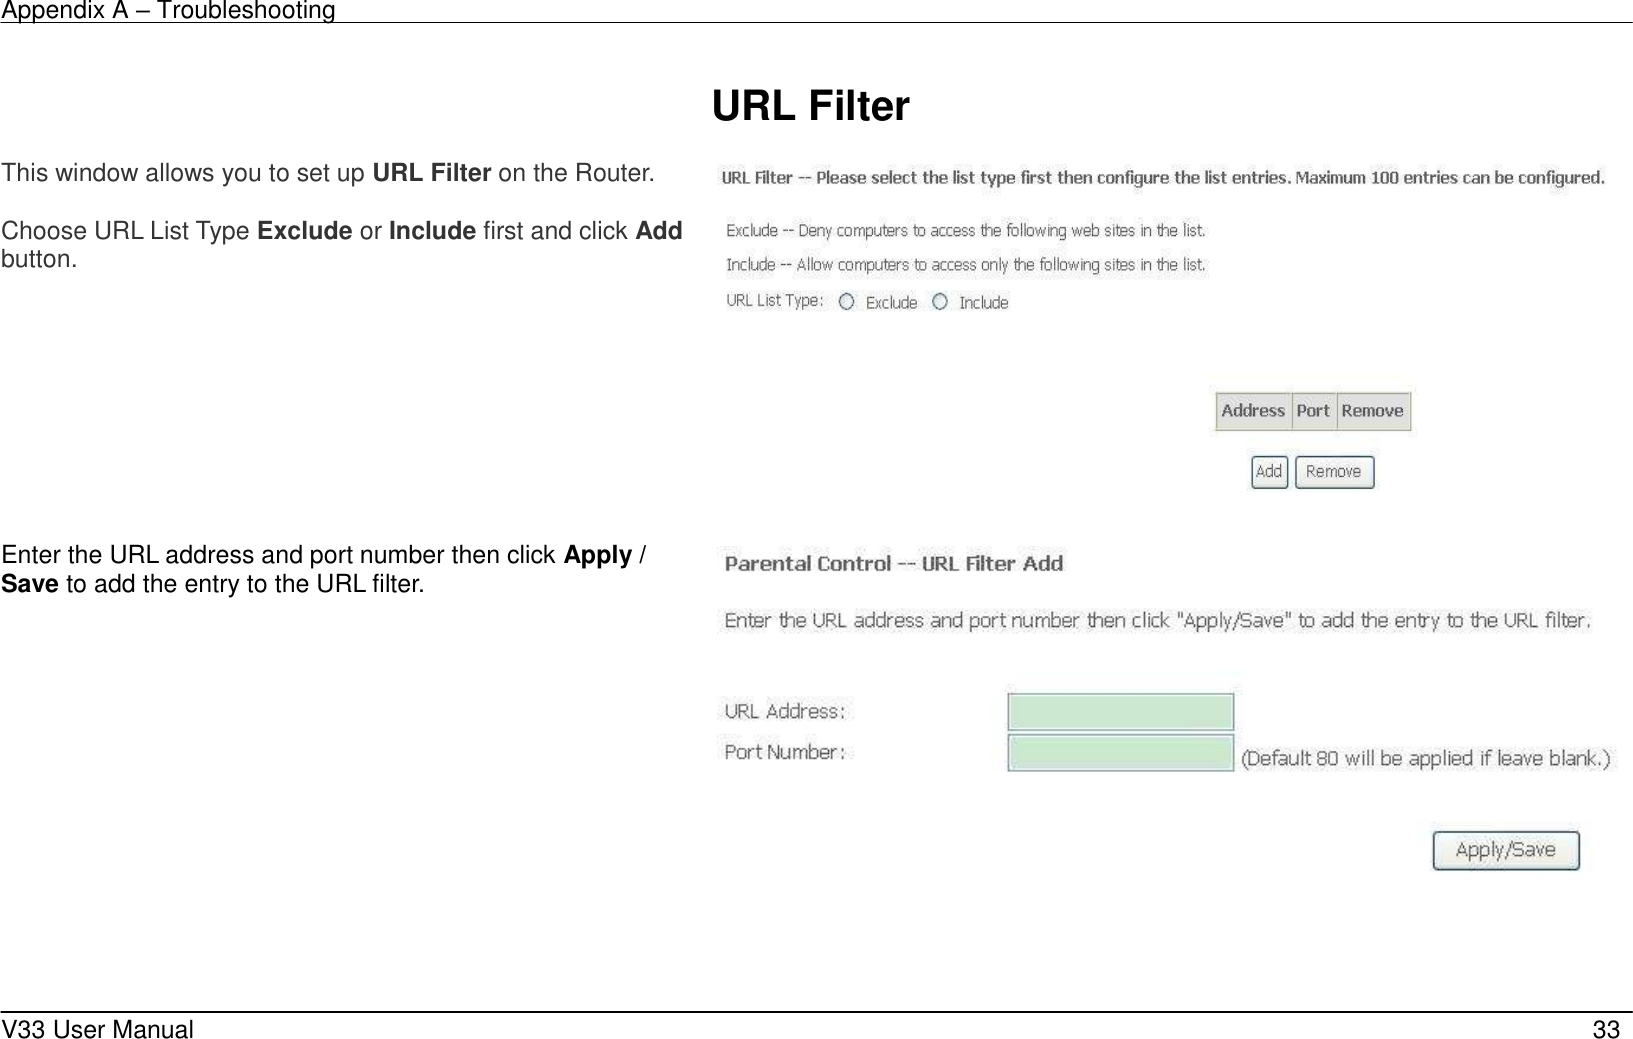 Appendix A – Troubleshooting    V33 User Manual   33  URL Filter  This window allows you to set up URL Filter on the Router.    Choose URL List Type Exclude or Include first and click Add button.    Enter the URL address and port number then click Apply / Save to add the entry to the URL filter.  